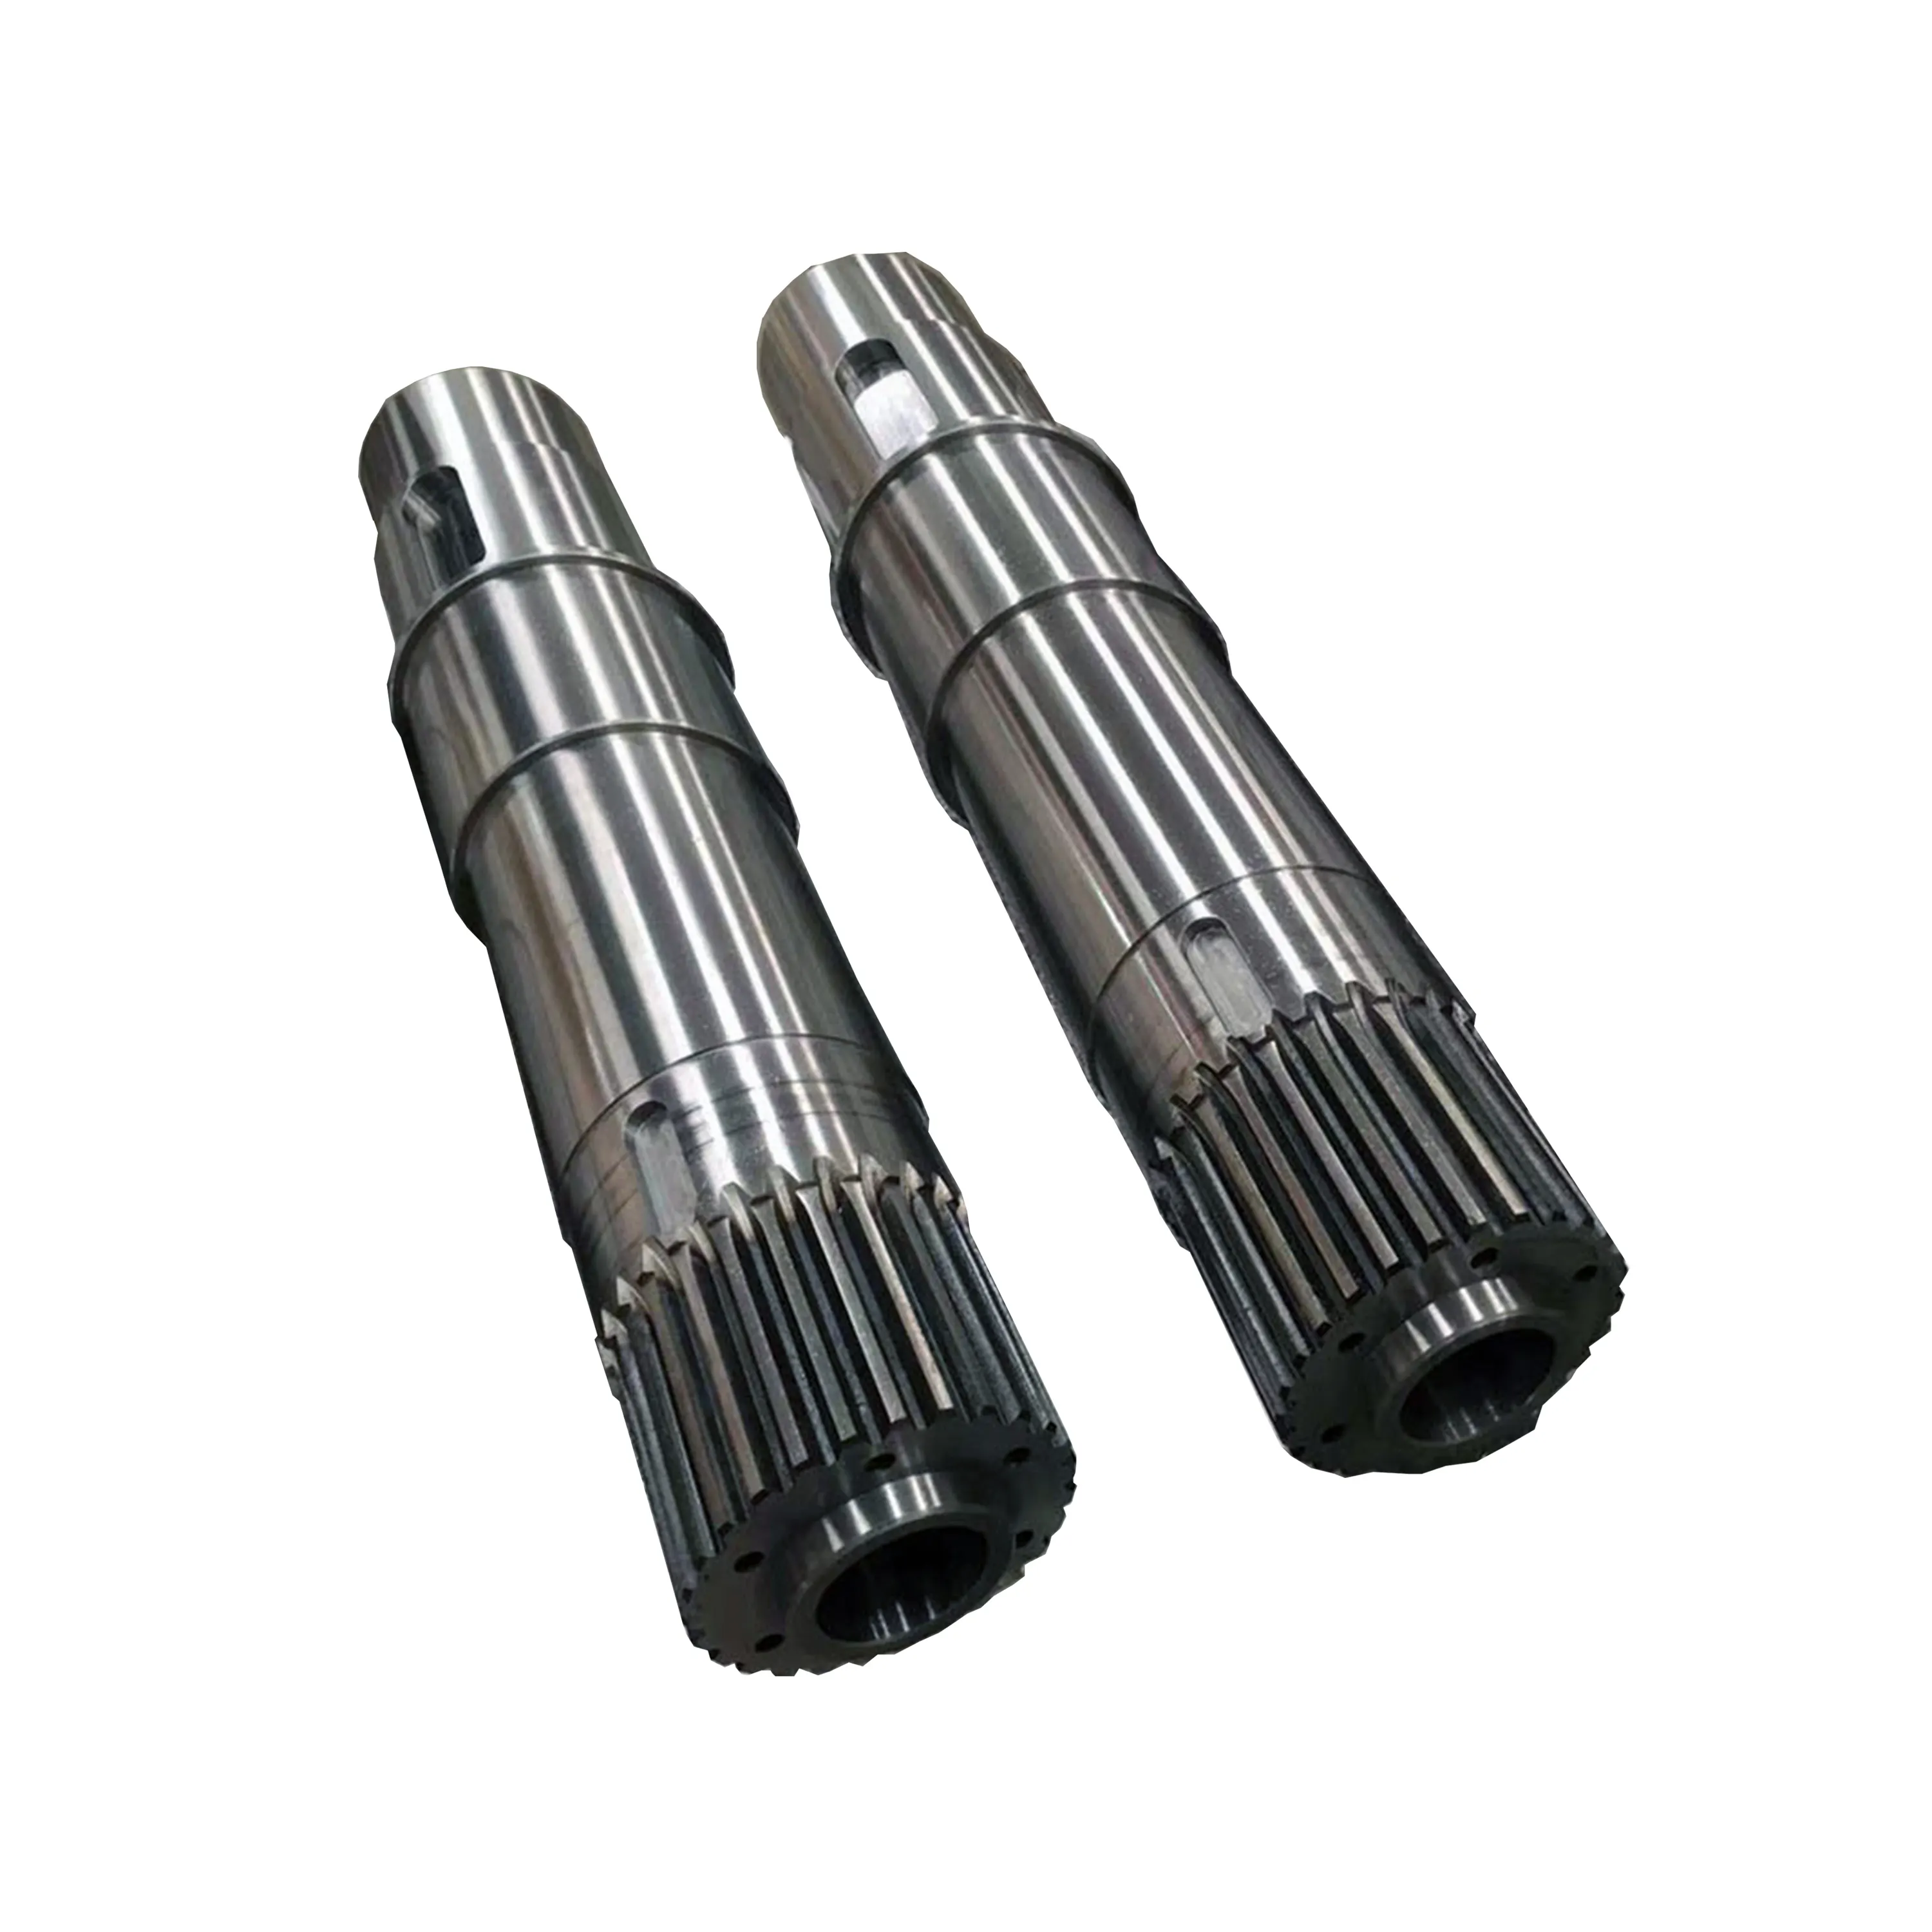 Factory customized export steel spline shaft transmission shaft step shaft with high quality and long shelf life